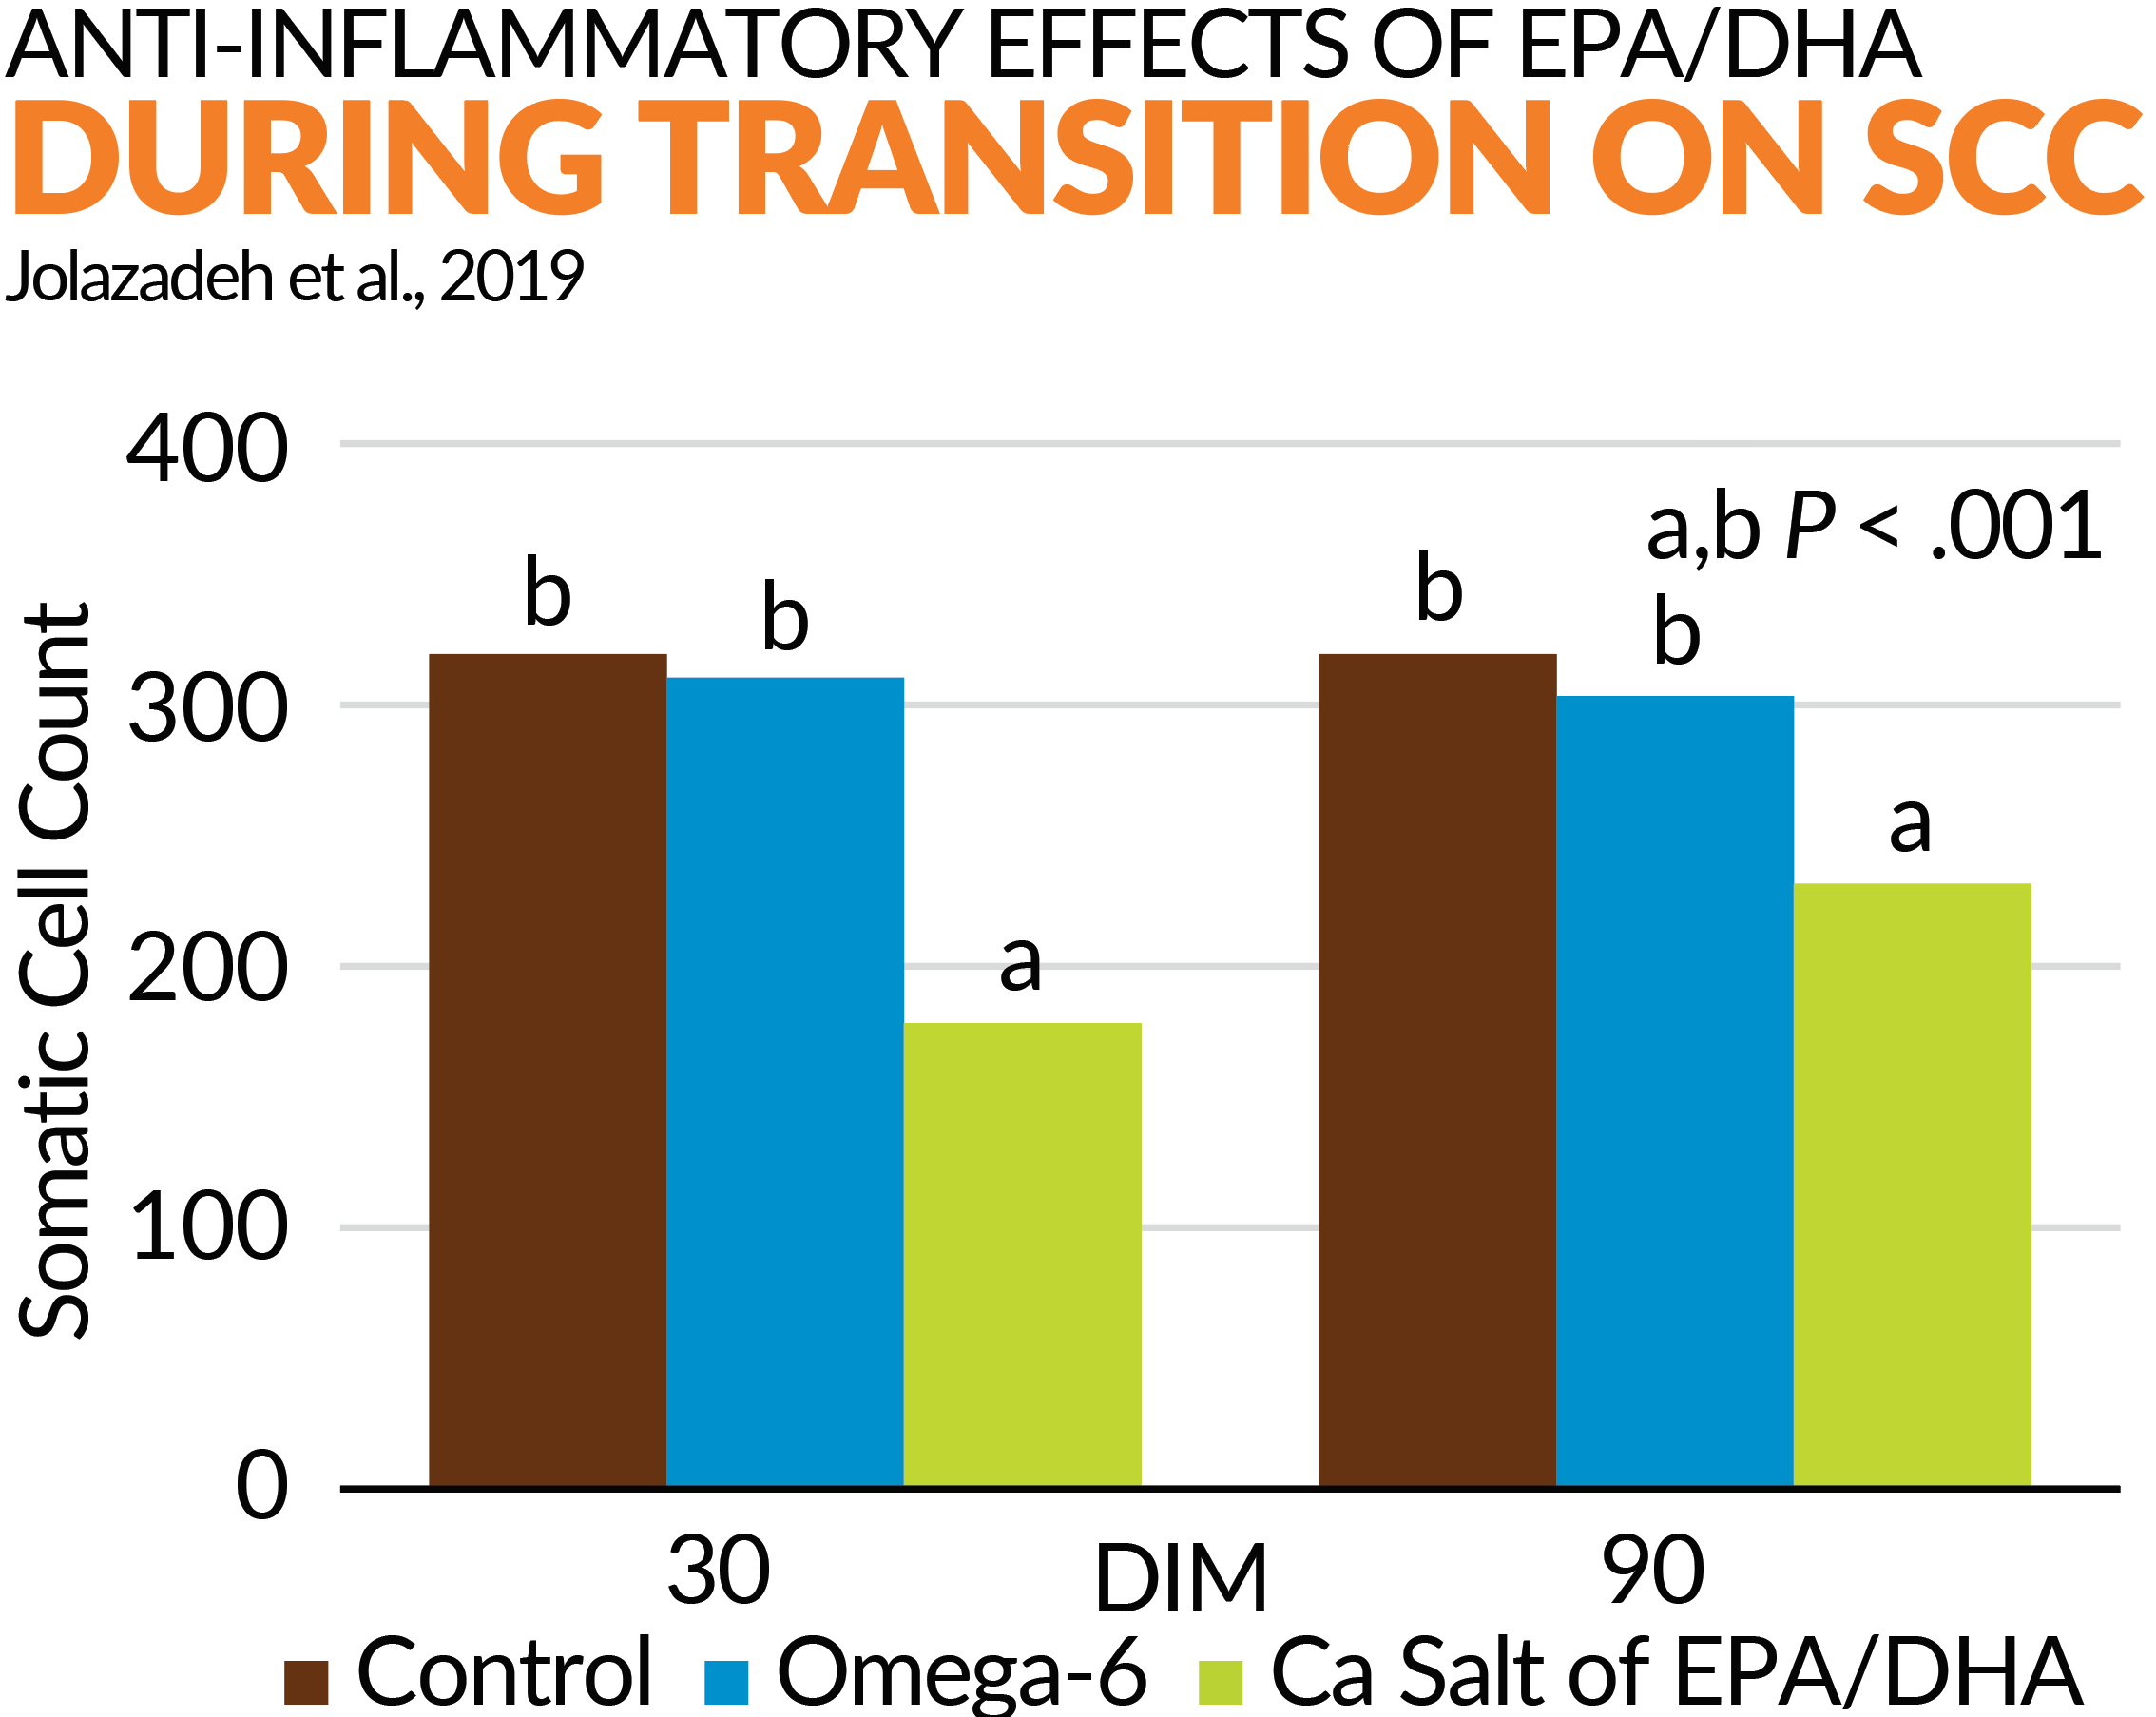 Chart showing anti-inflammatory effects of EPA/DHA during transition on SCC